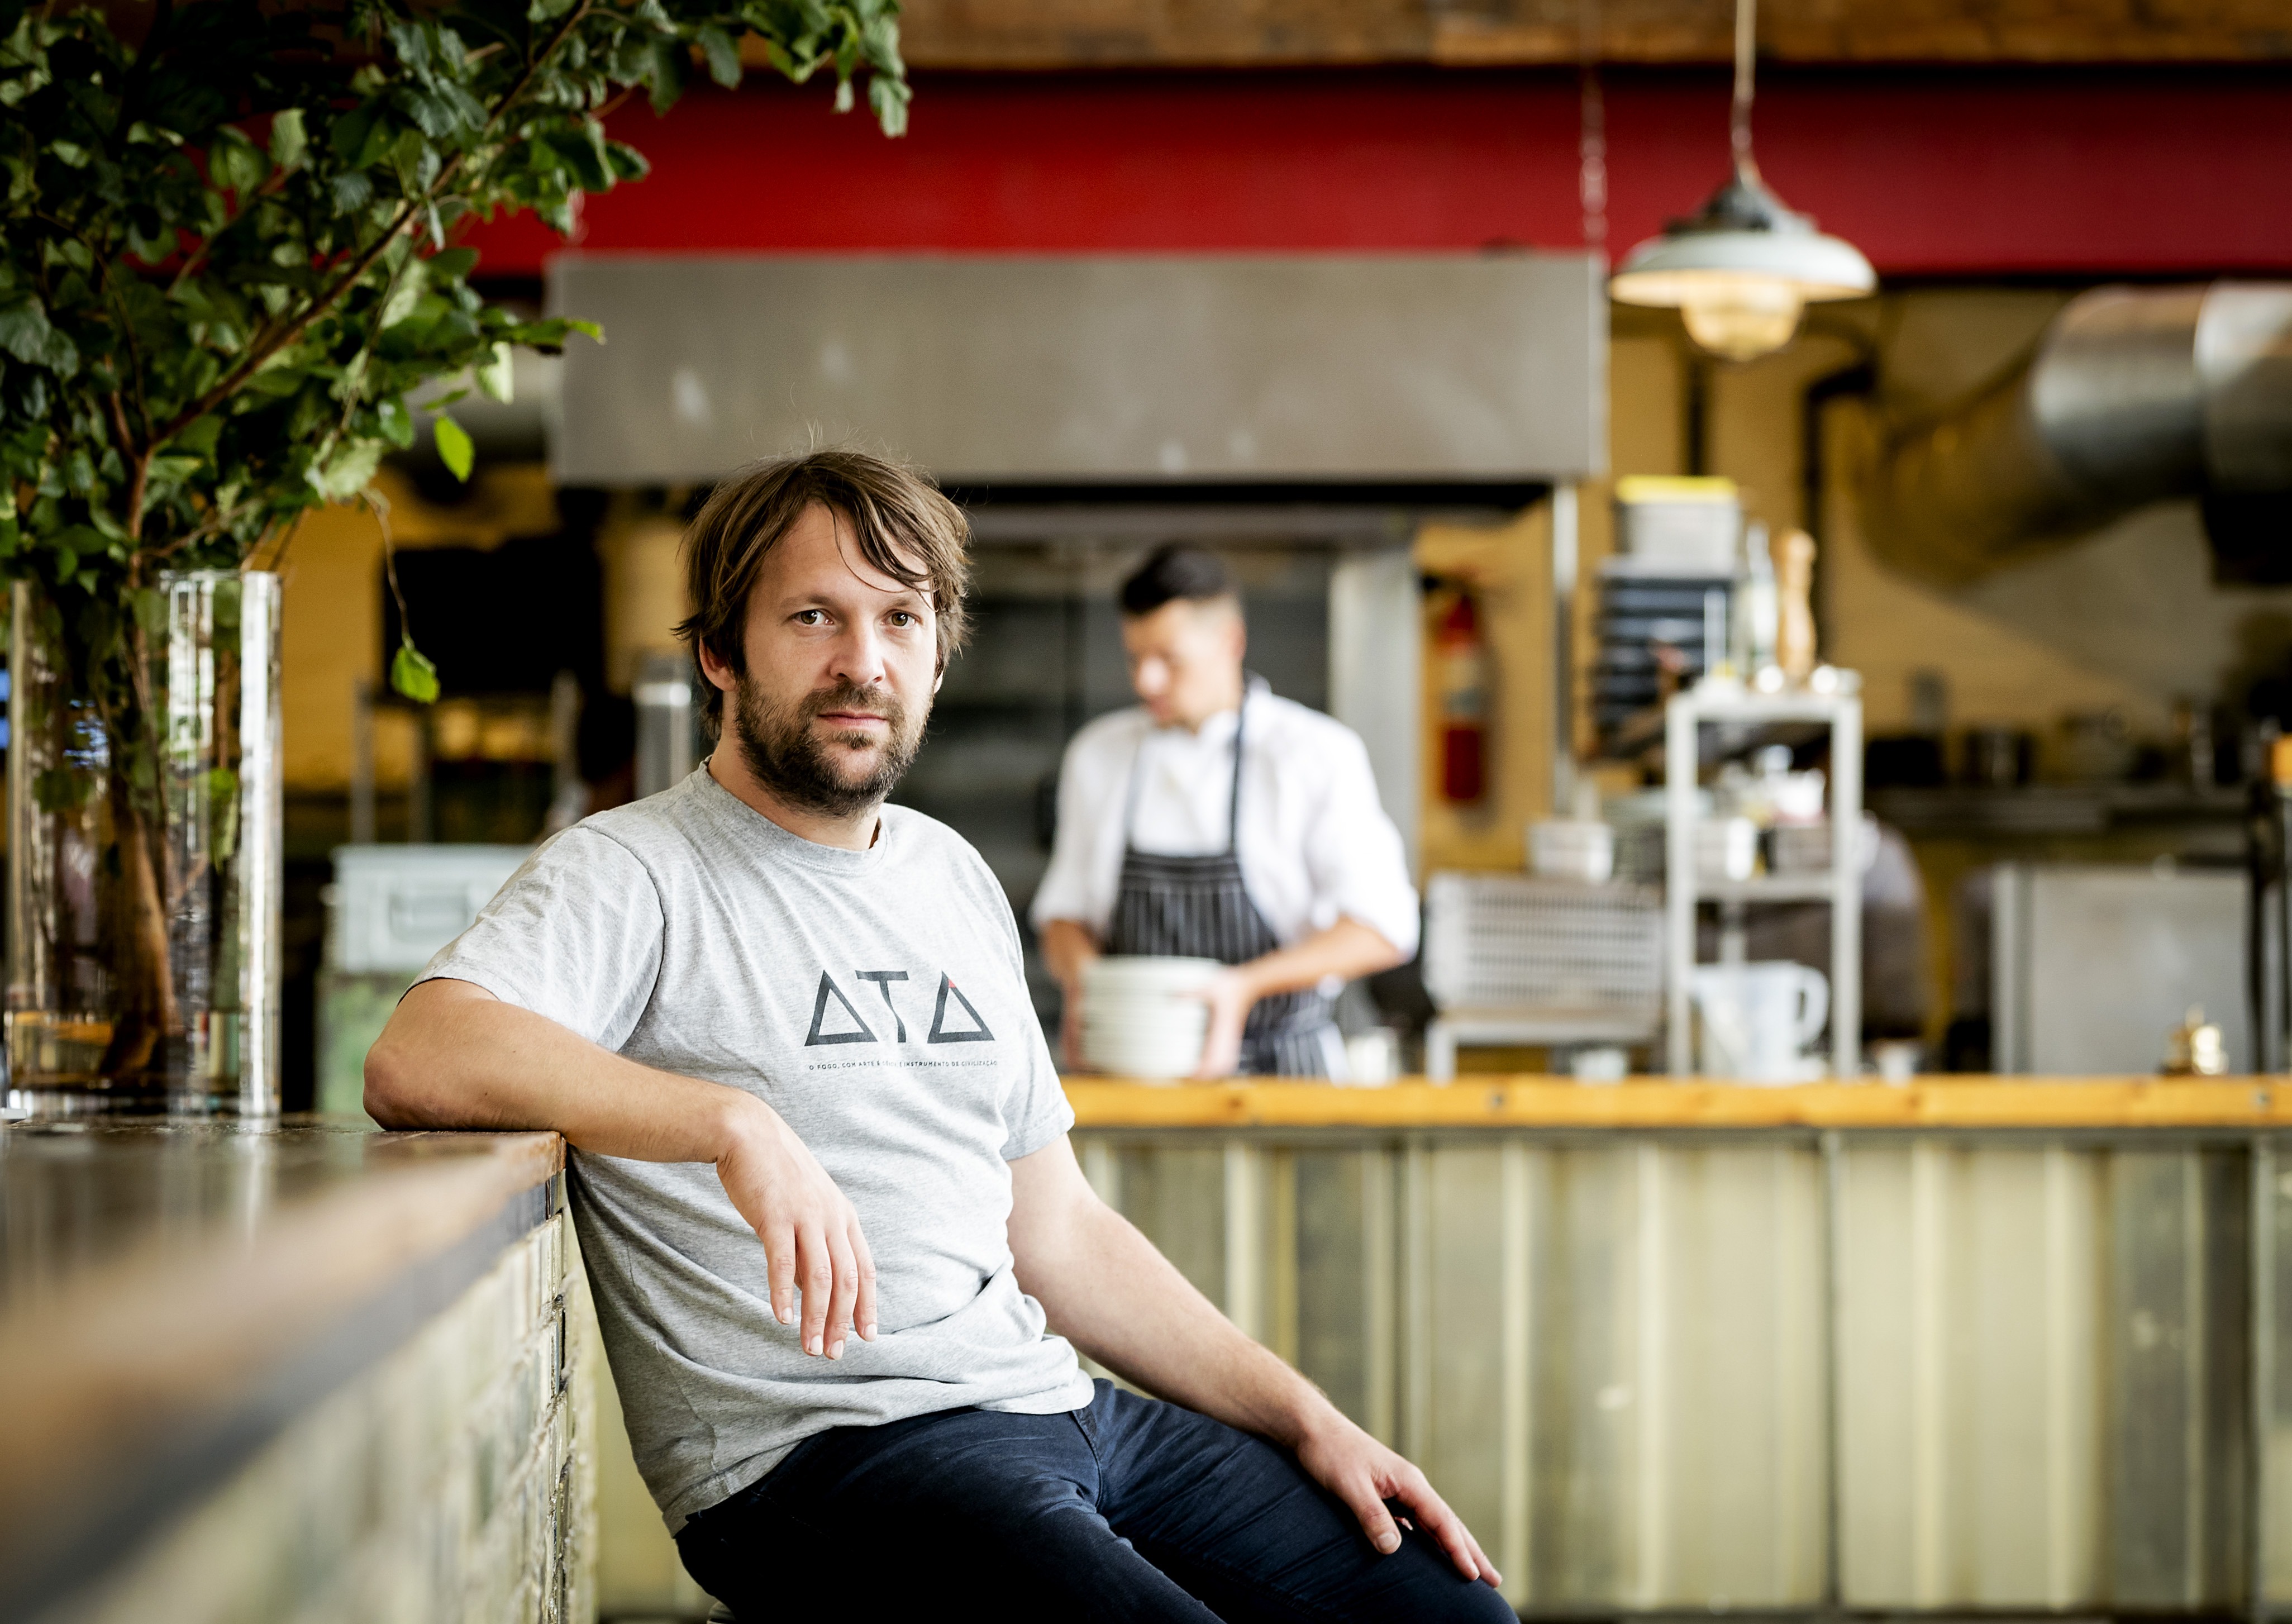 Danish chef Rene Redzepi, co-owner of the restaurant Noma in Copenhagen, Denmark, poses for a photograph prior to a premiere of 